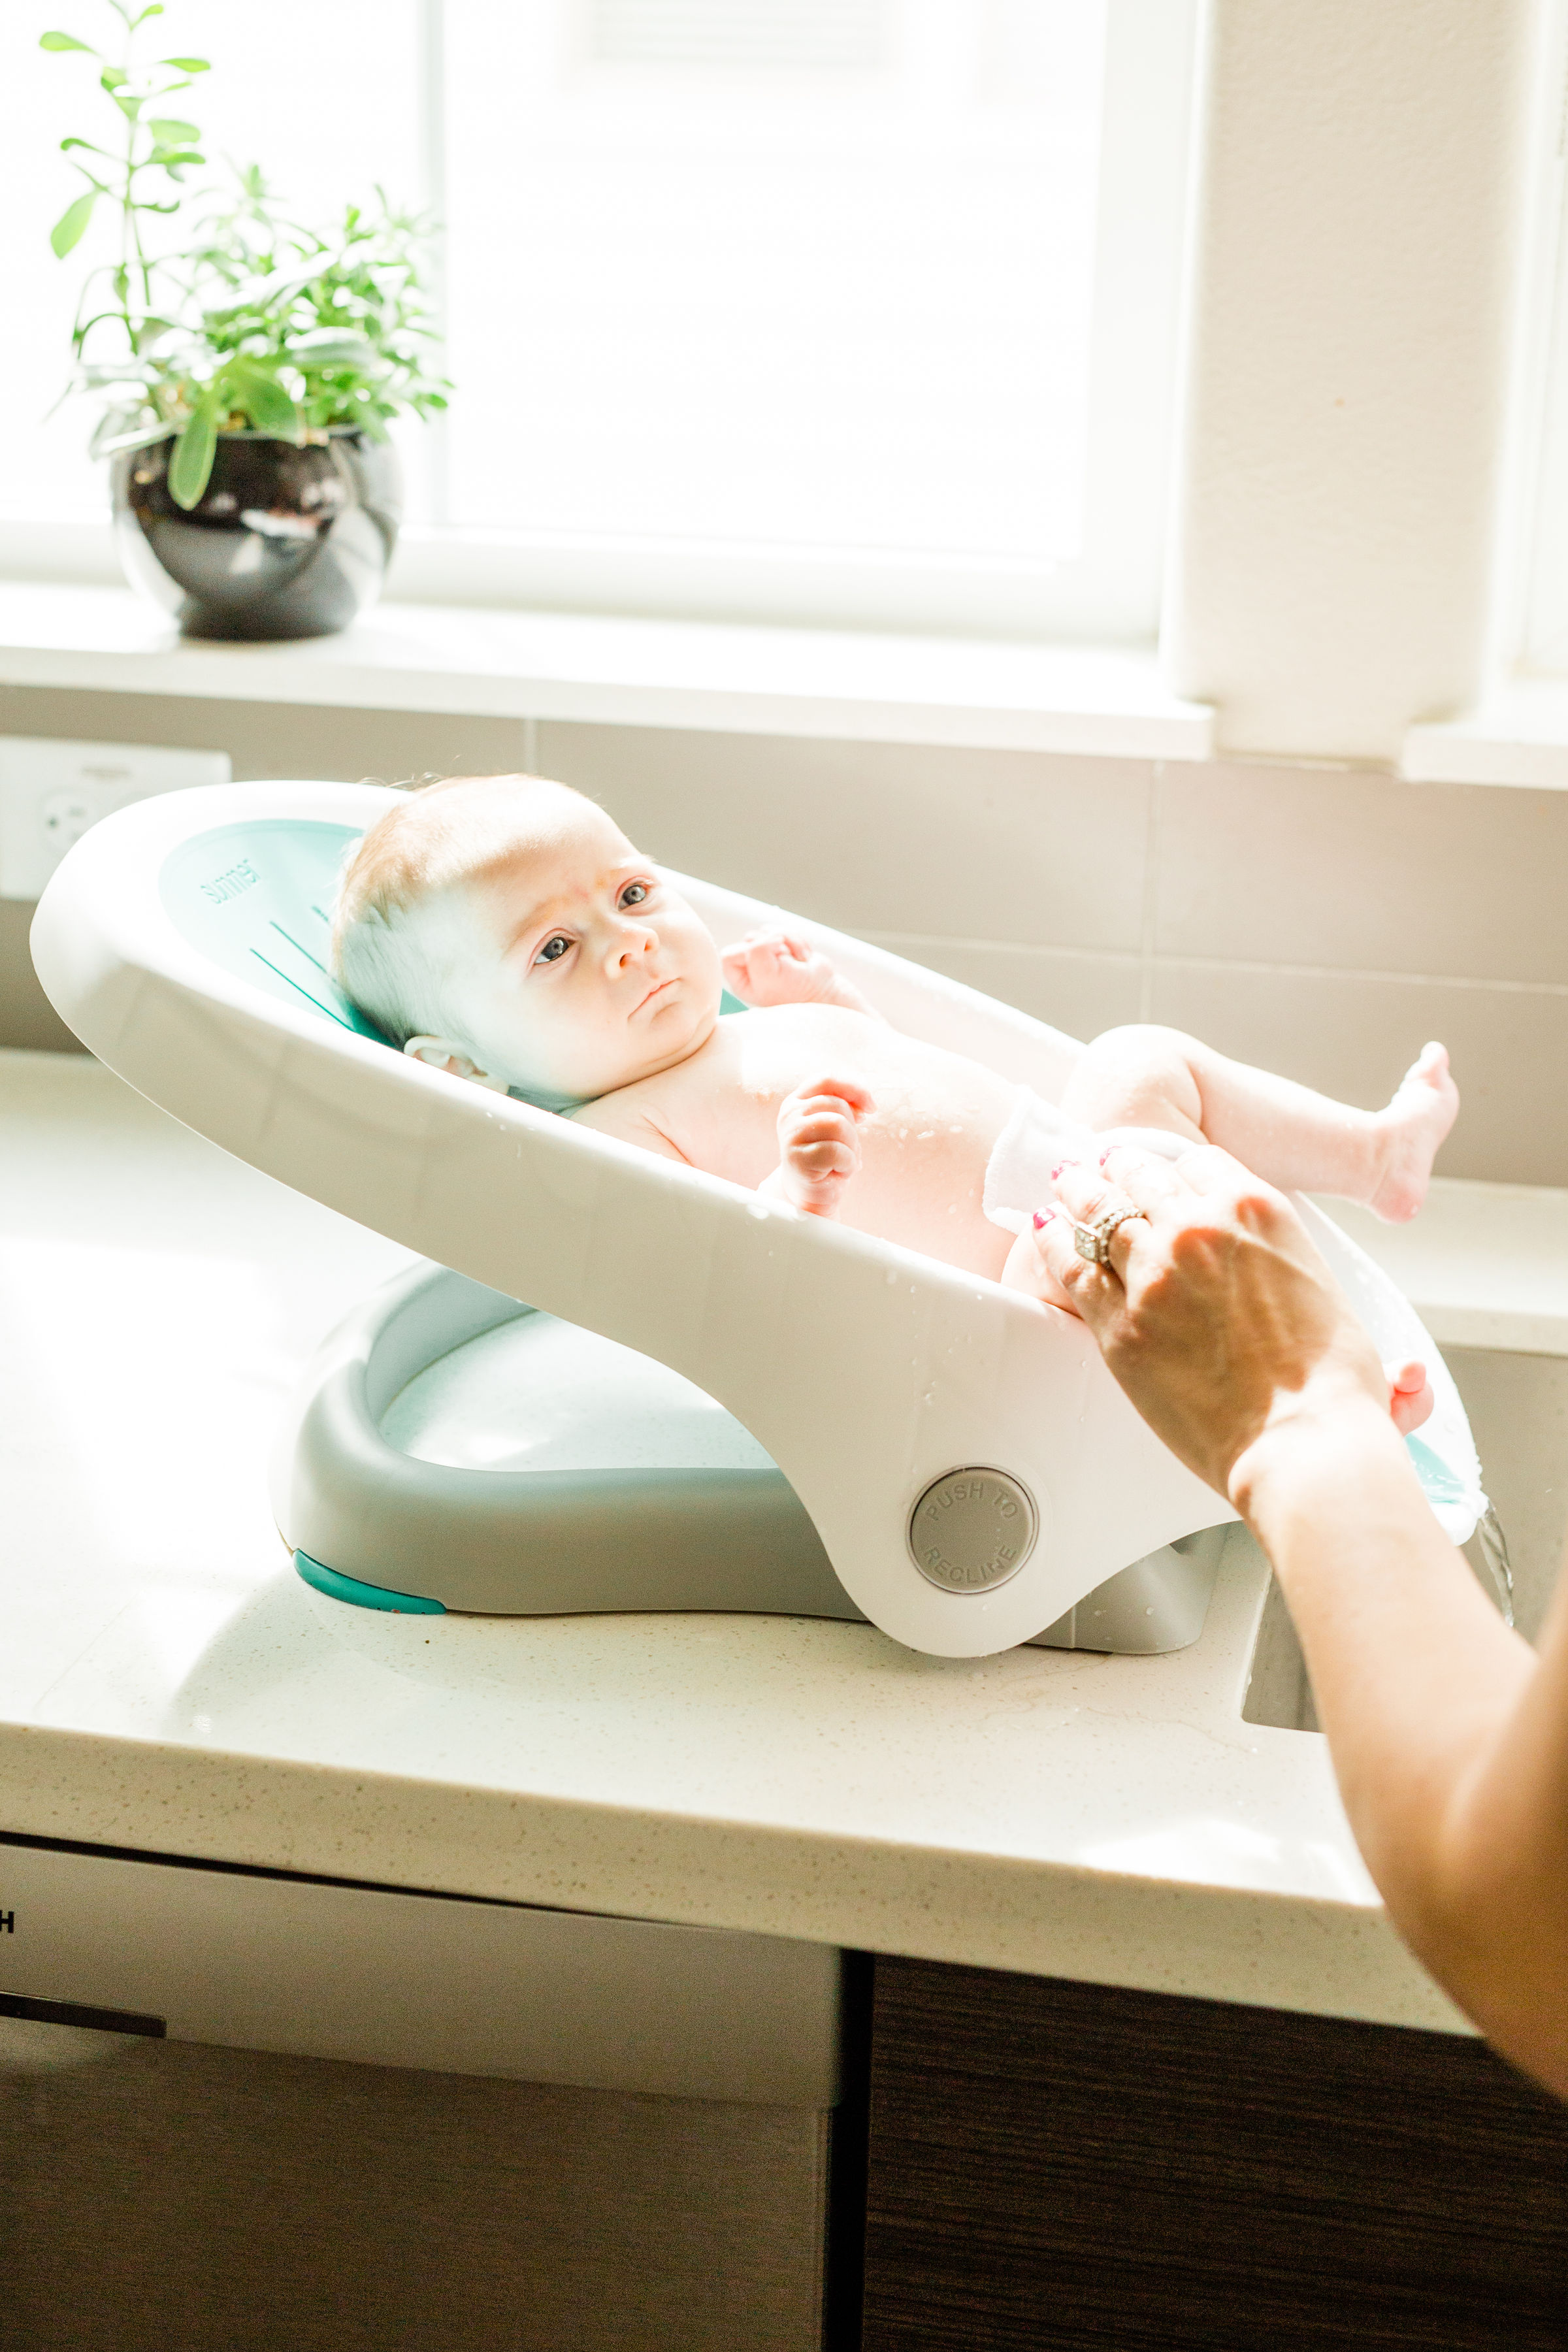 Quick-Dry Material Summer Clean Rinse Baby Bather in Bath Tub or in Sink Bath Support for Use on The Counter Bather Has 3 Reclining Positions and Soft from Birth Until Sitting Up Pink 